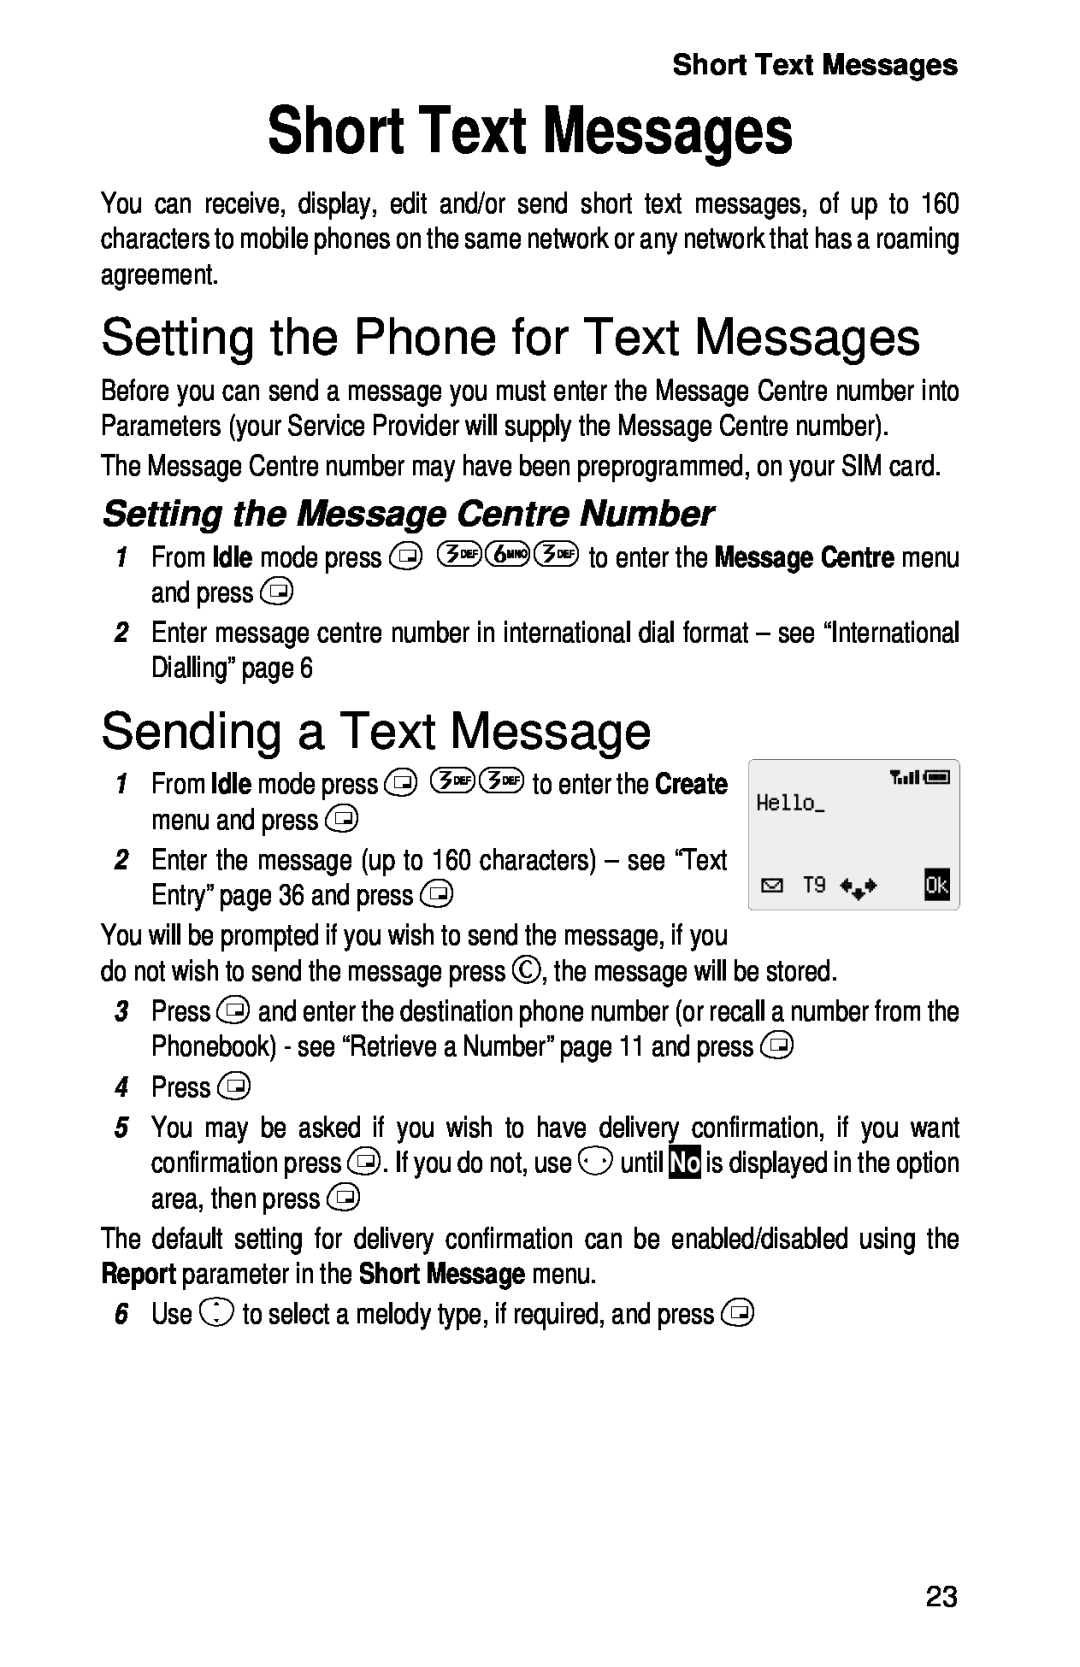 Panasonic EB-GD52 operating instructions Short Text Messages, Setting the Phone for Text Messages, Sending a Text Message 